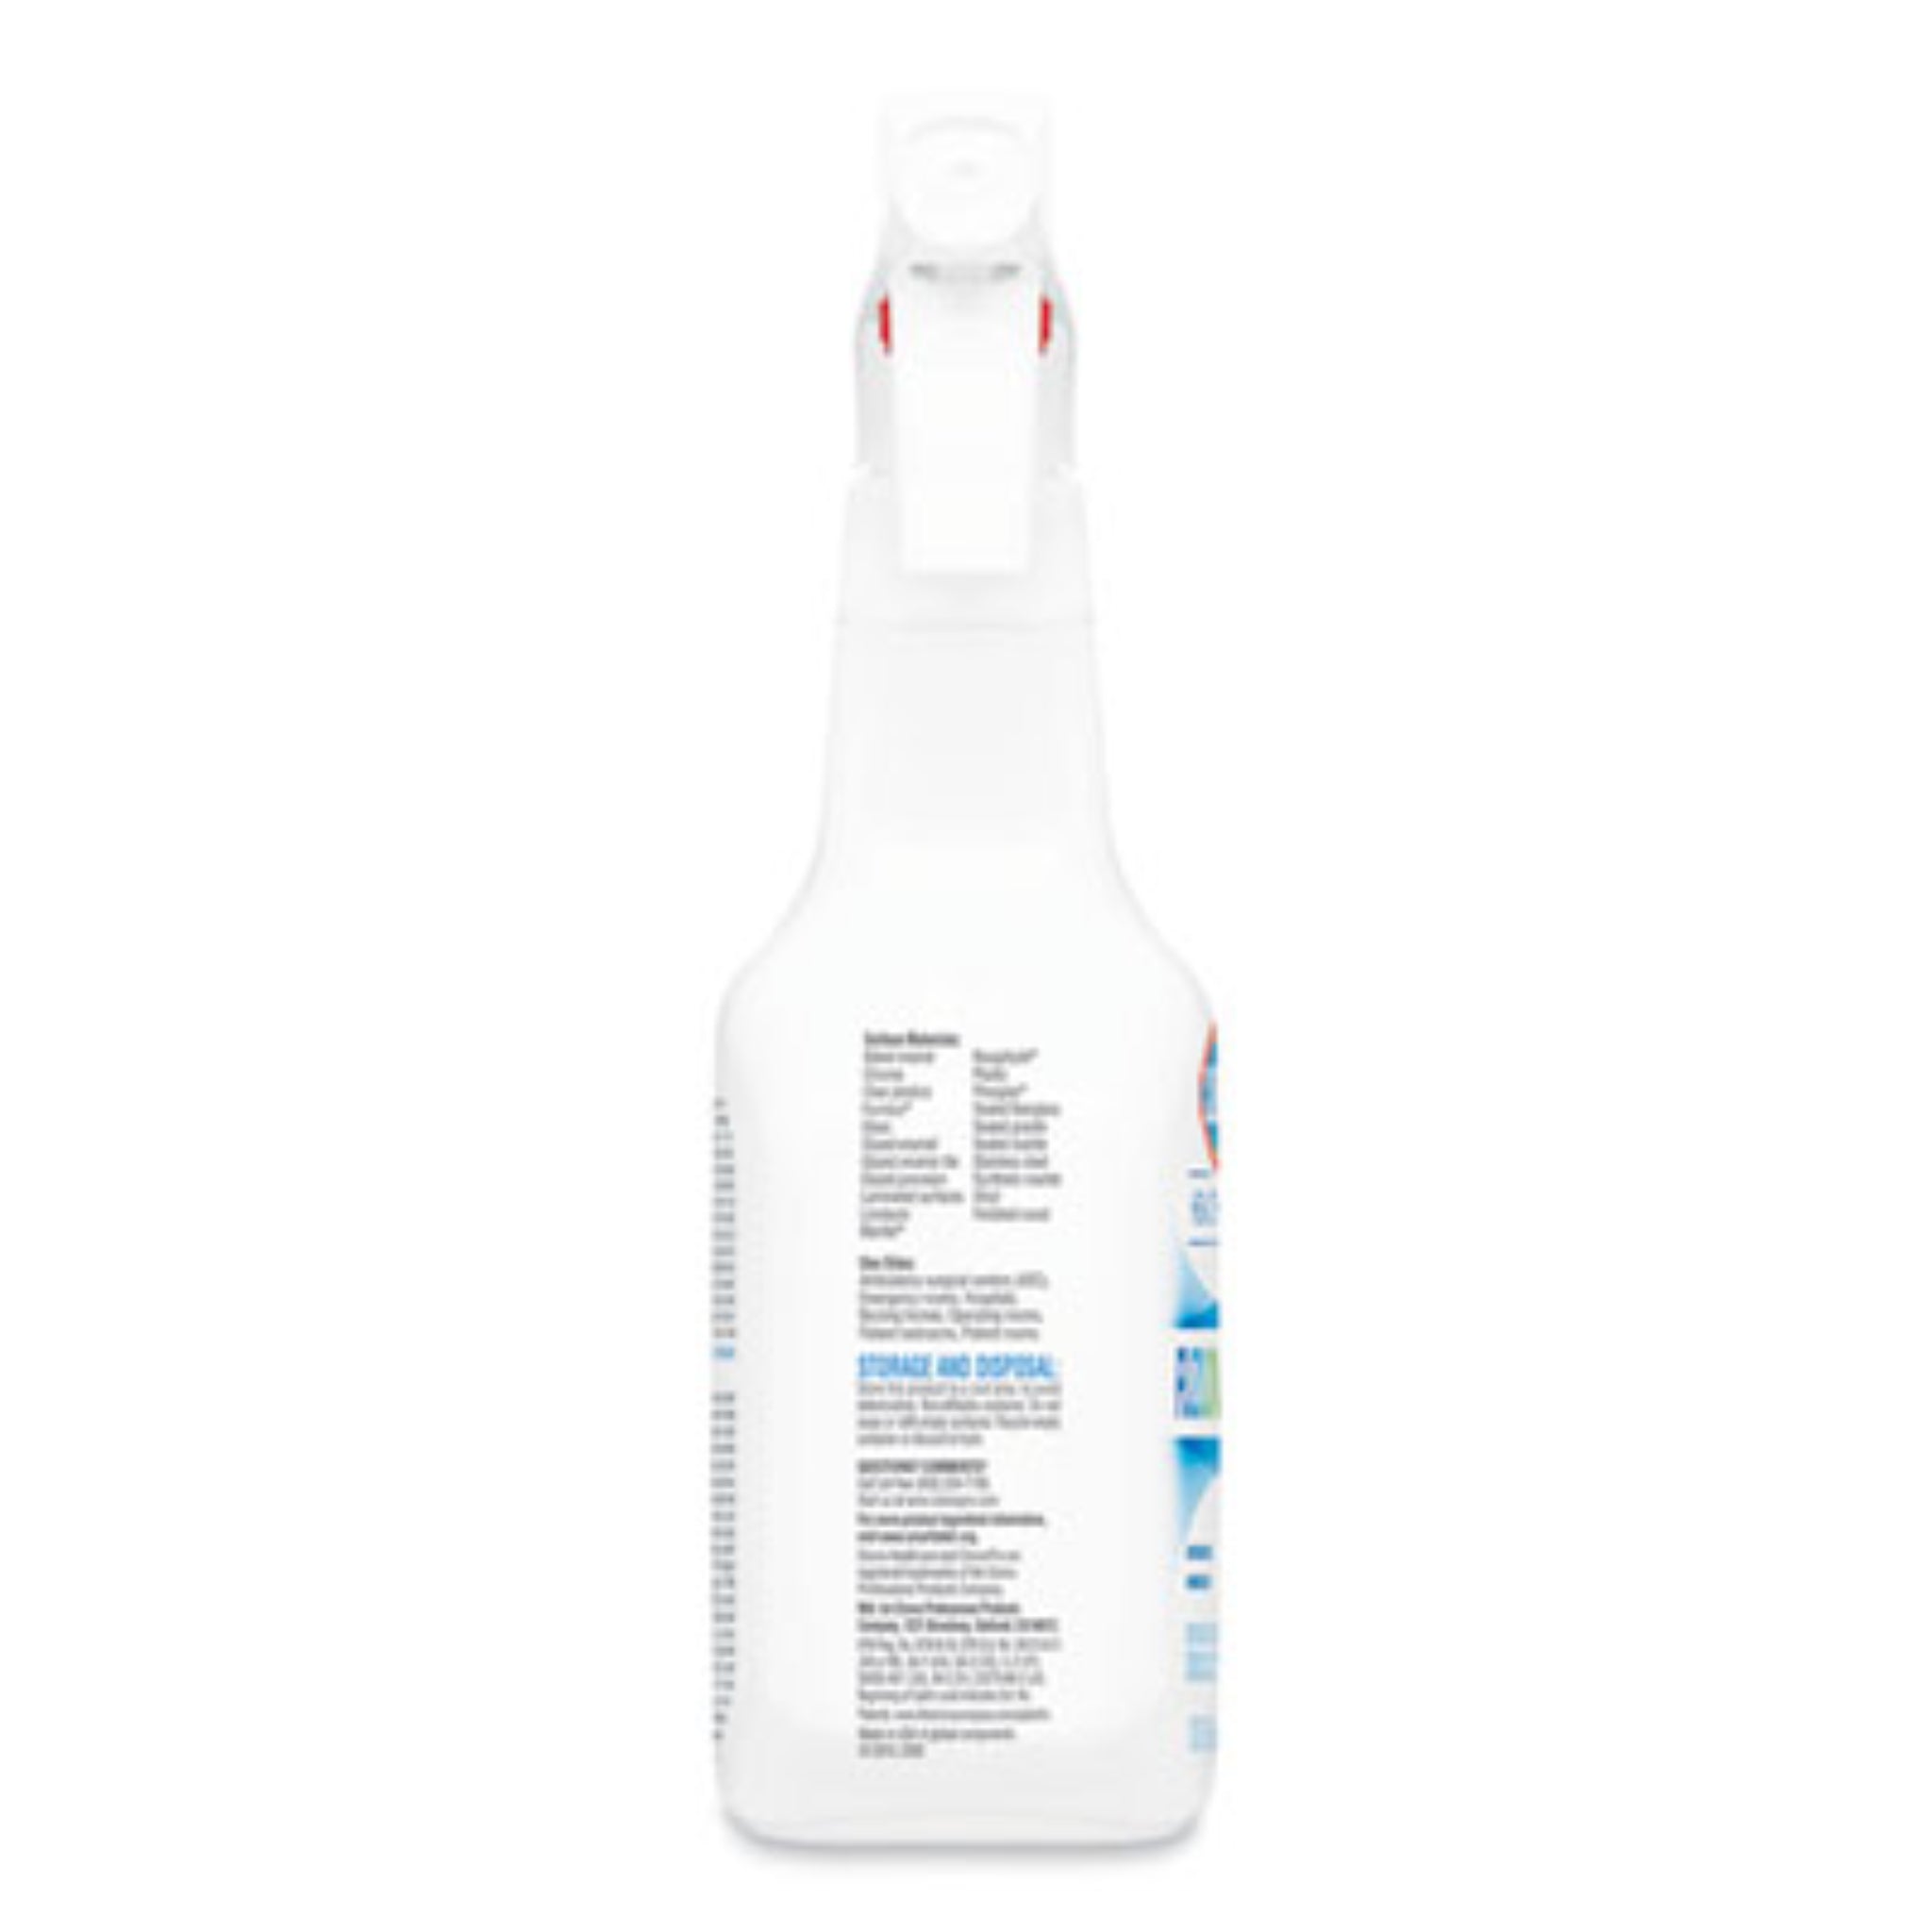 CLOROX SALES CO. CLO31478 Fuzion Cleaner Disinfectant, Side View